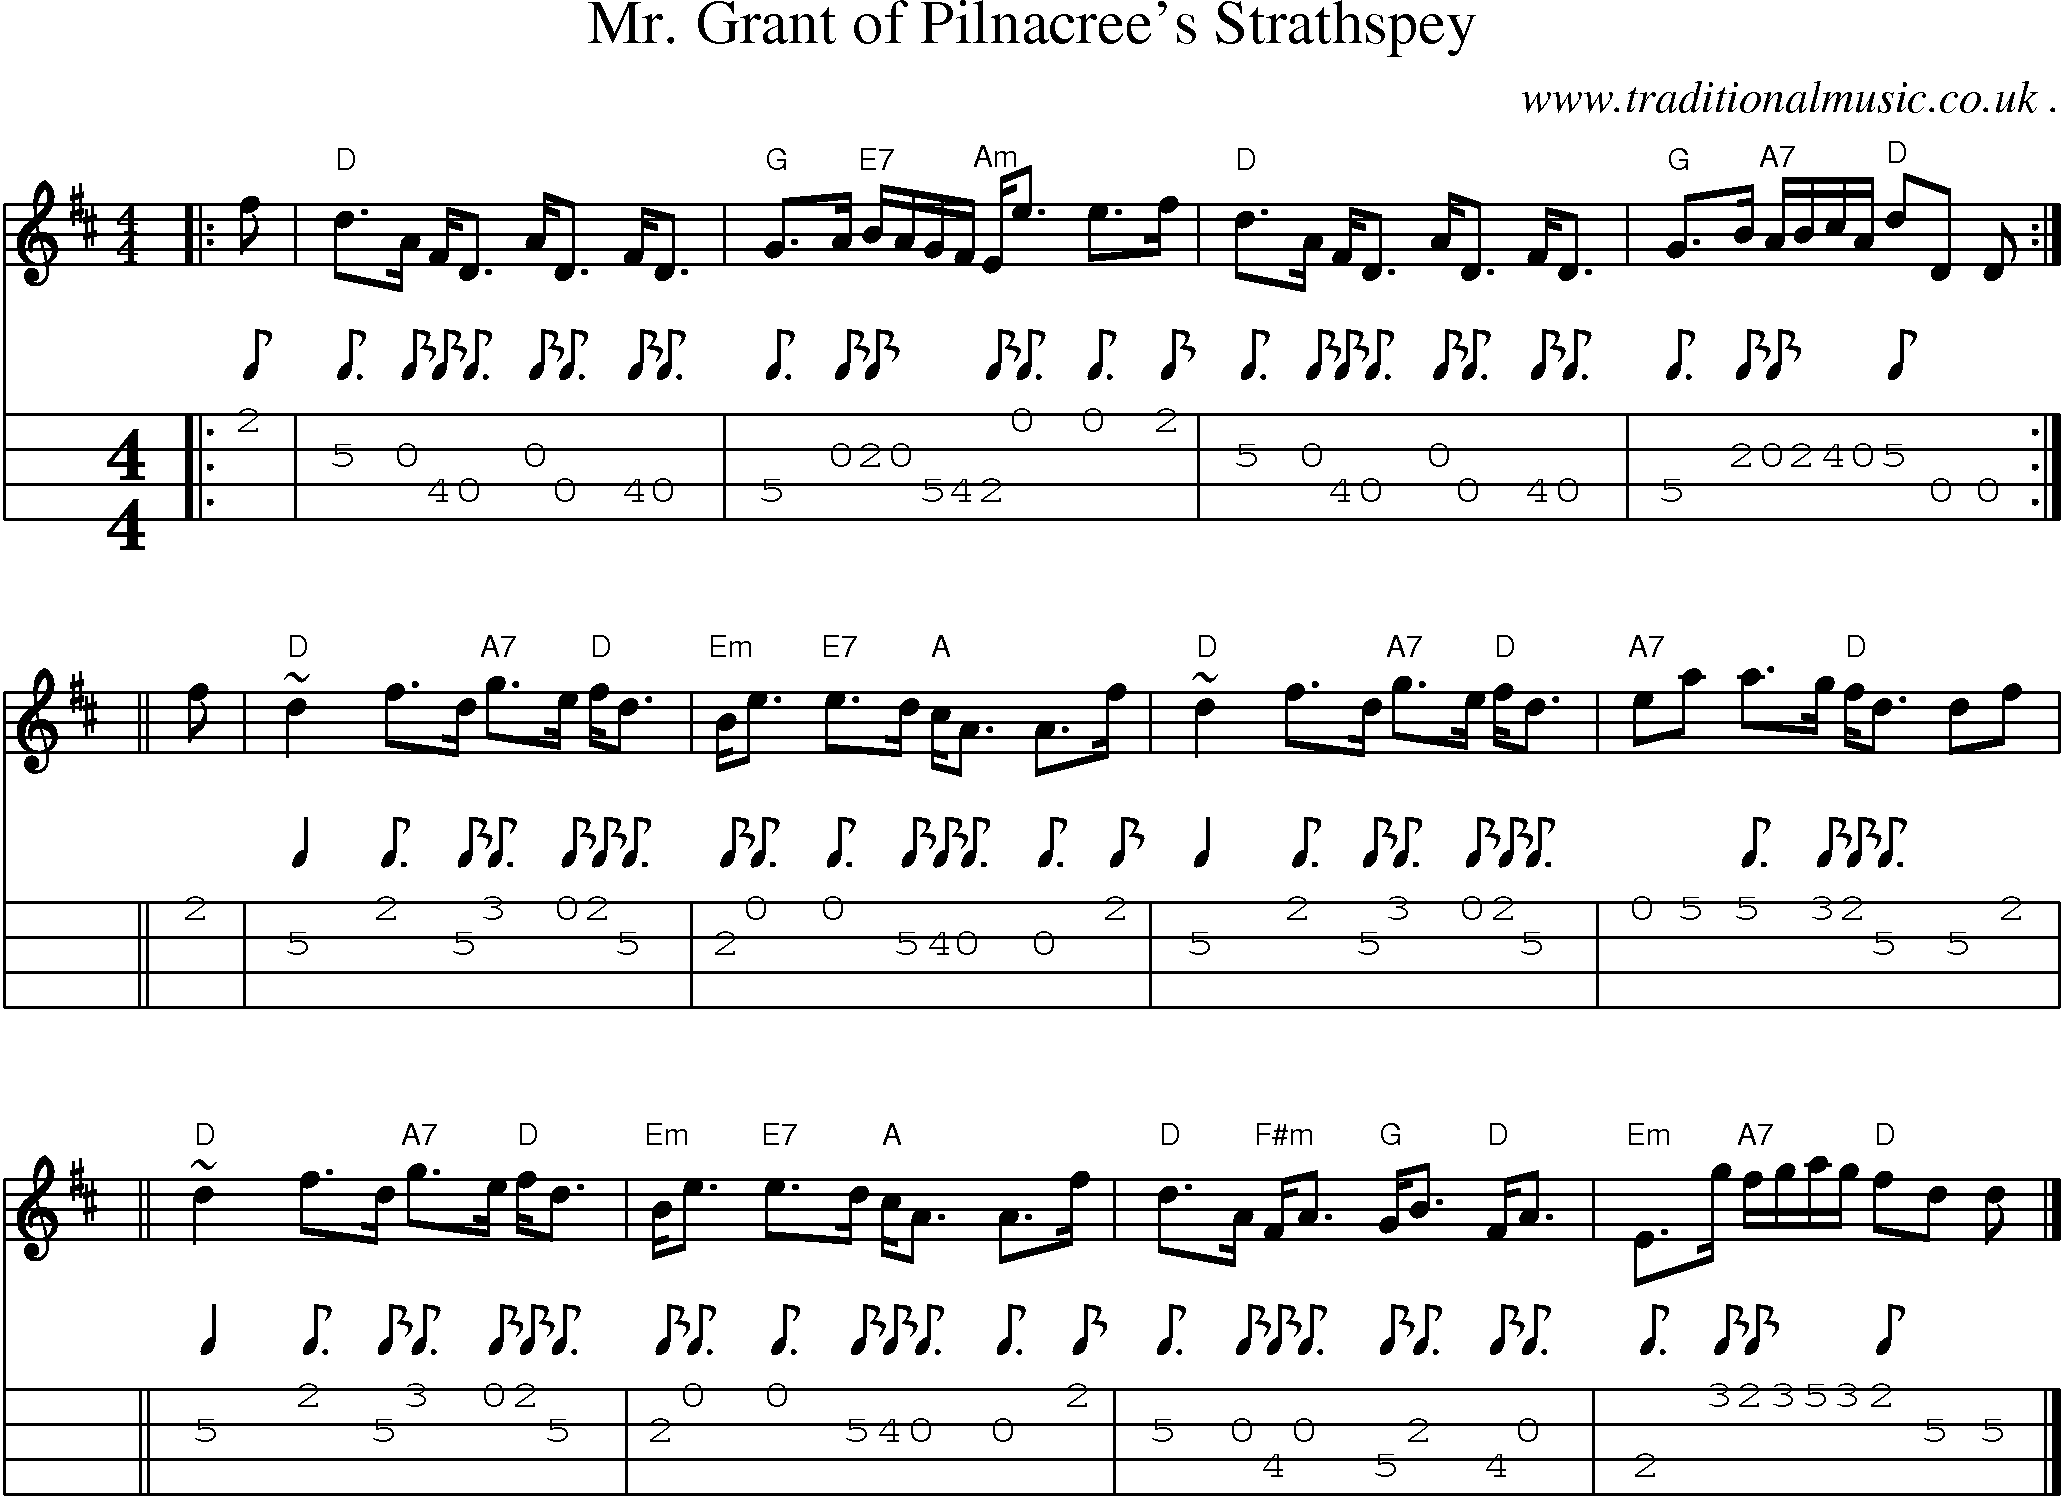 Sheet-music  score, Chords and Mandolin Tabs for Mr Grant Of Pilnacrees Strathspey